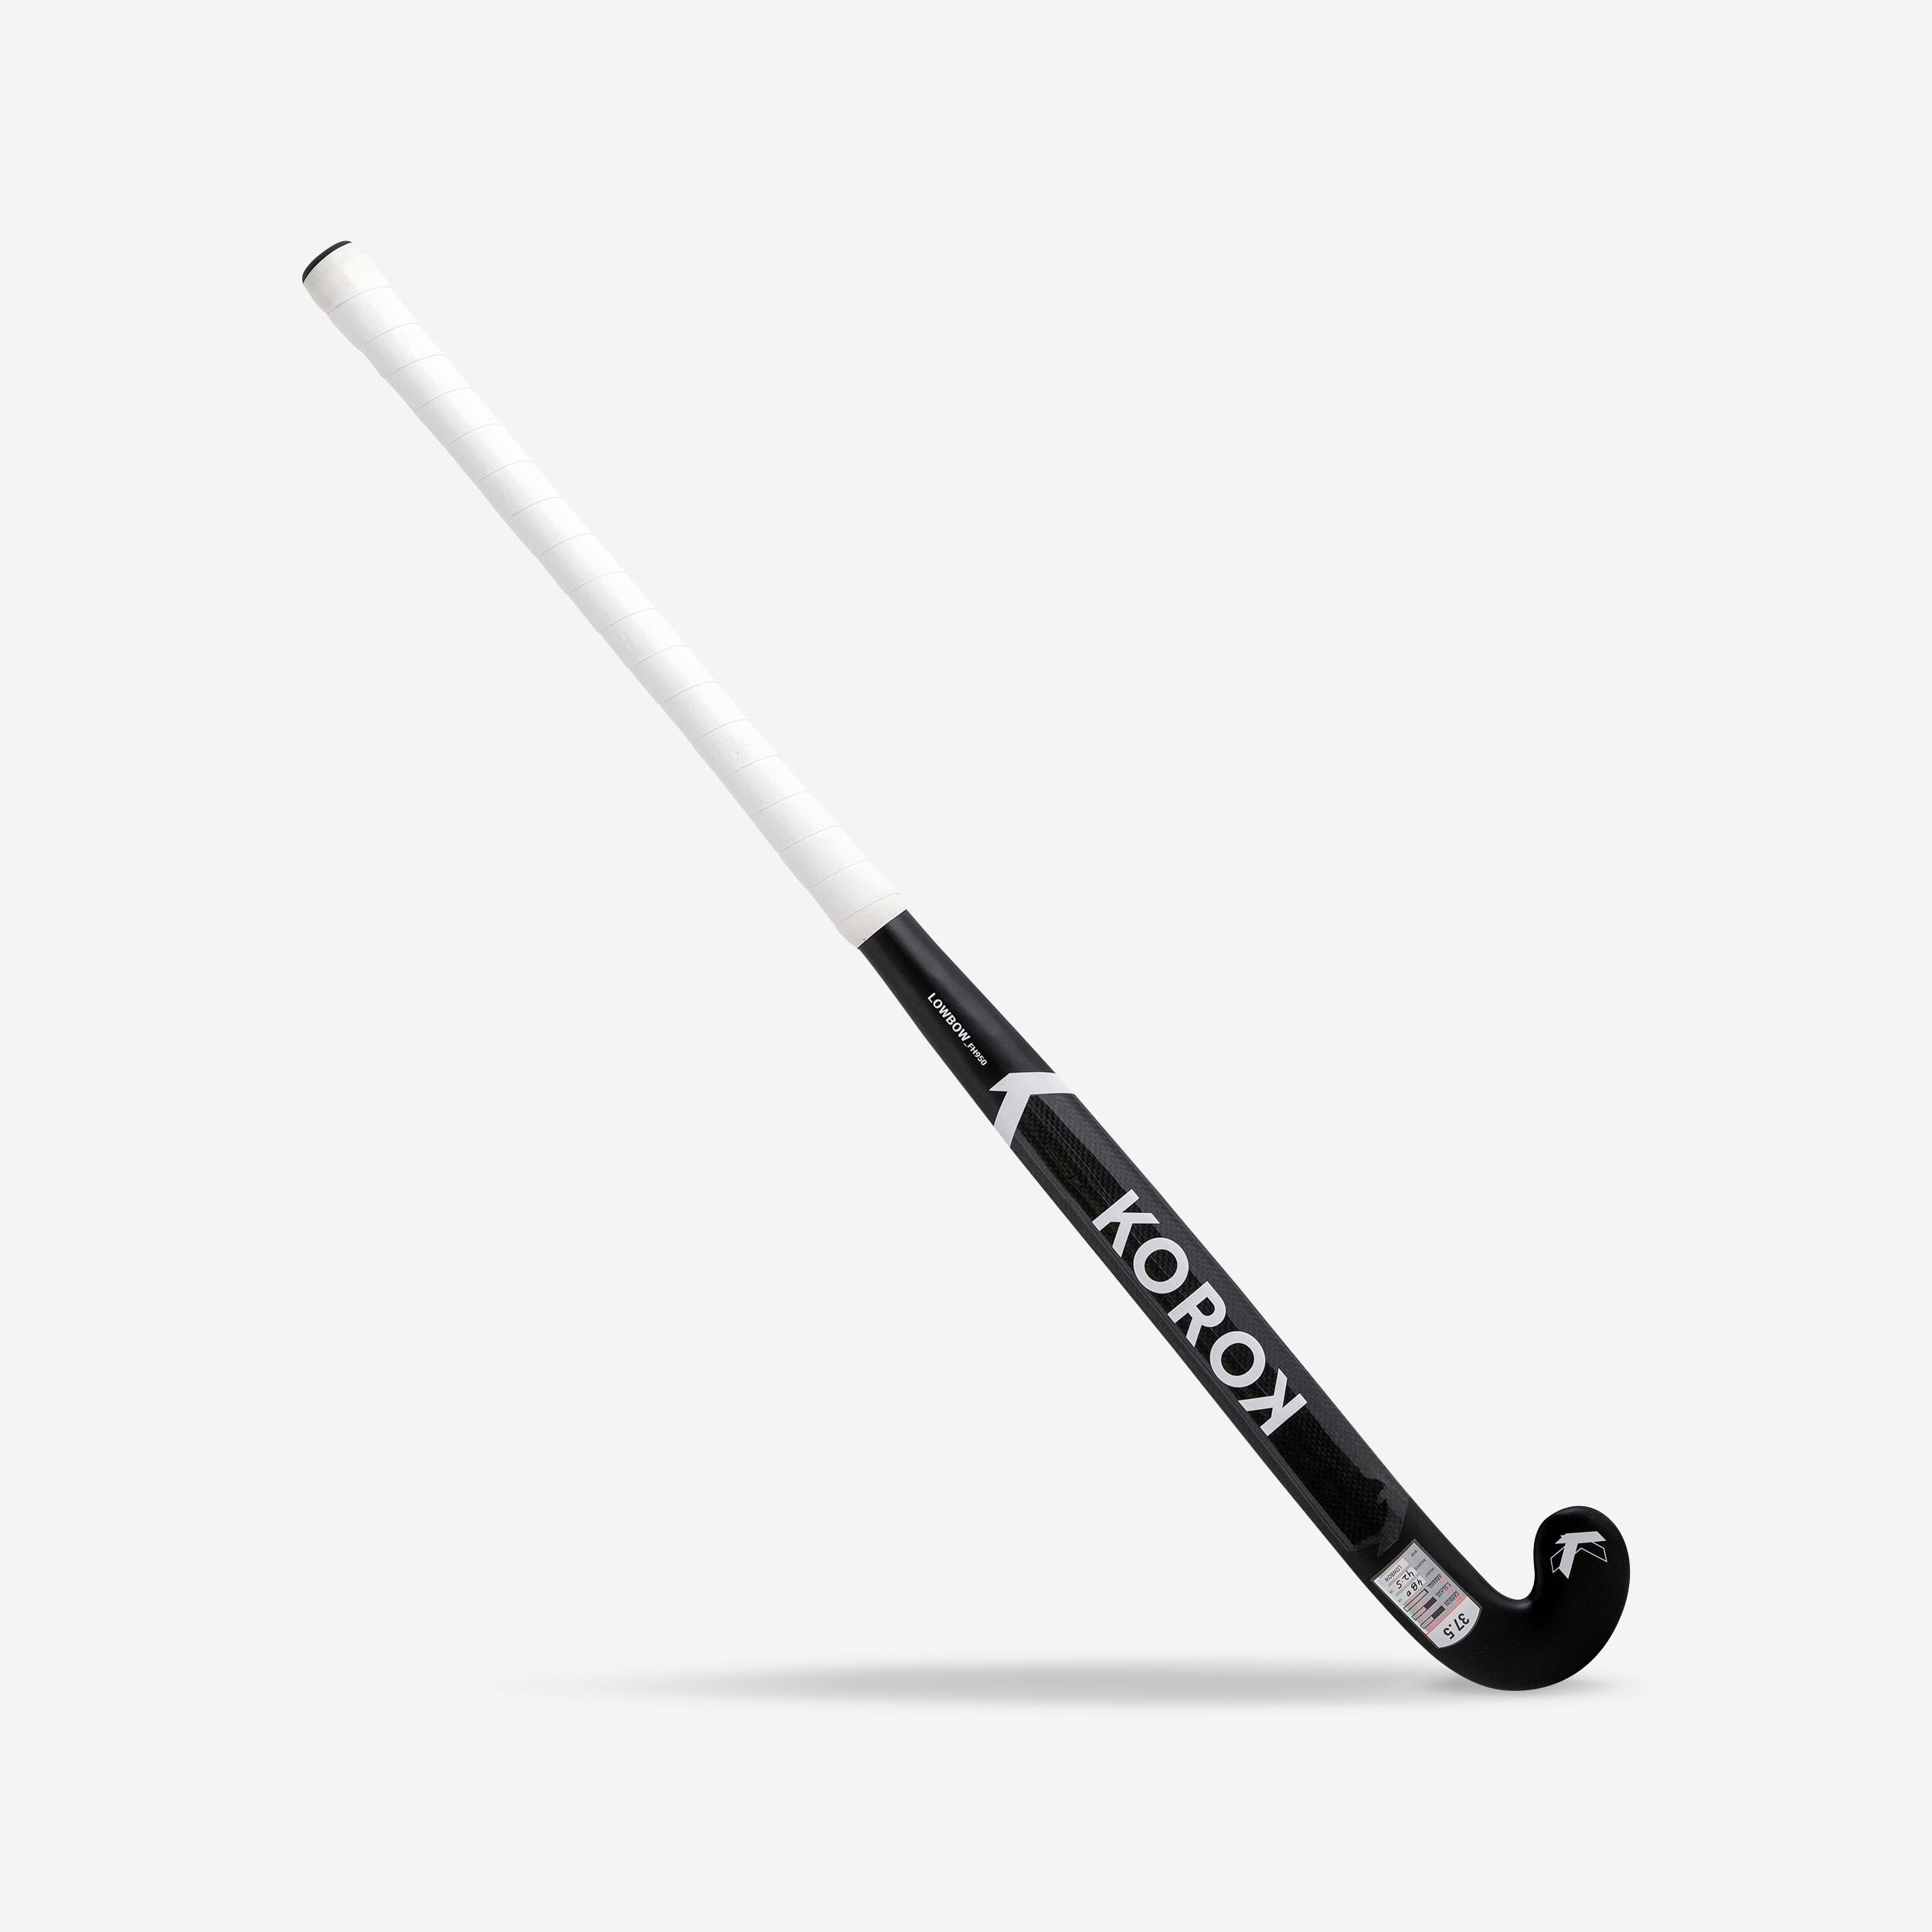 Adult Advanced 50% Carbon Low Bow Indoor Hockey Stick FH950 - Black/White 3/10